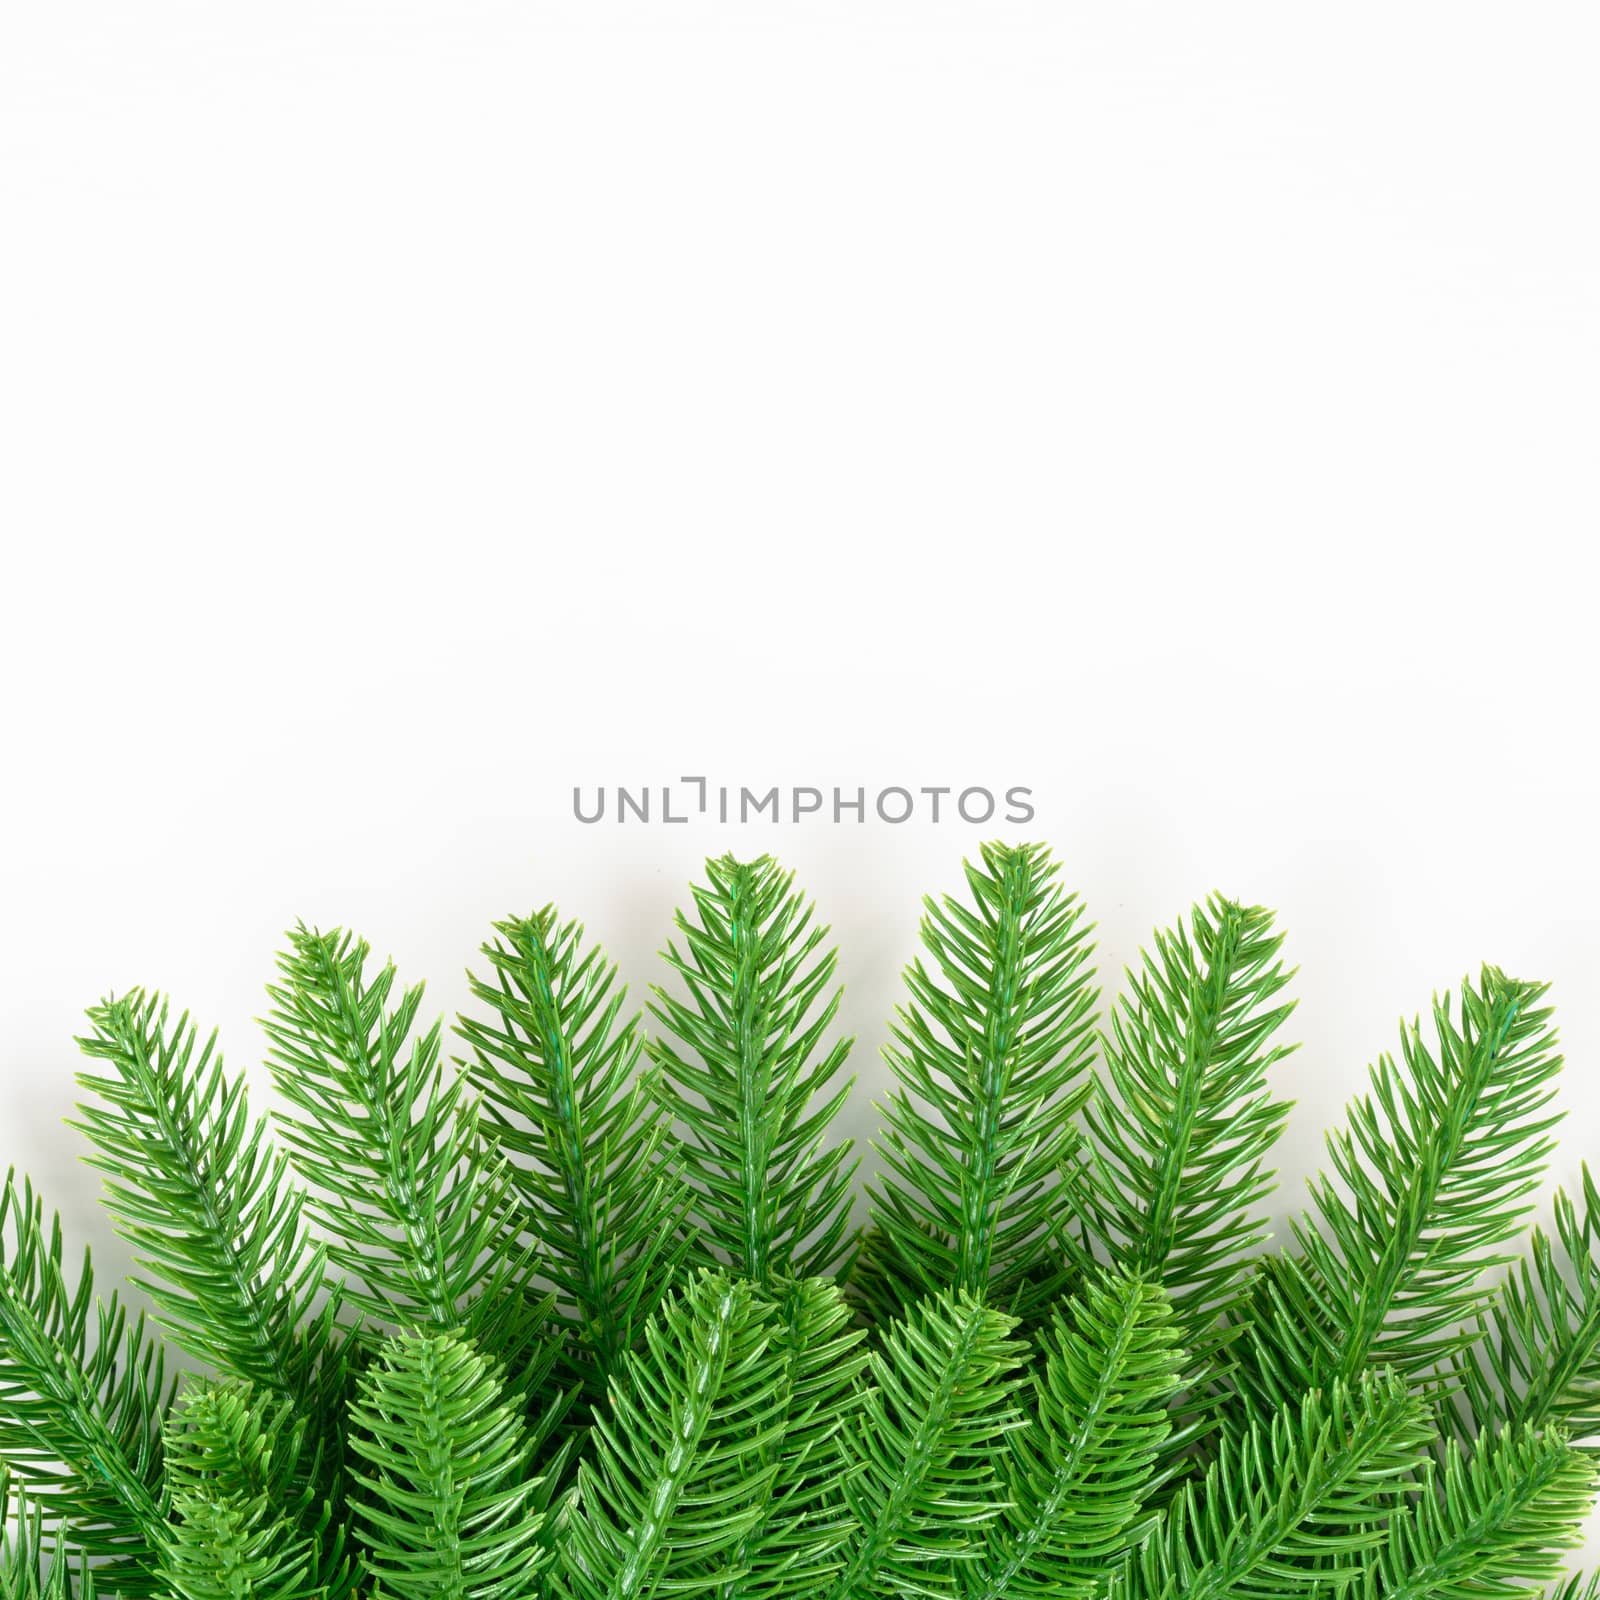 Happy new year or christmas day top view decorative fir tree on white background with copy space for your text